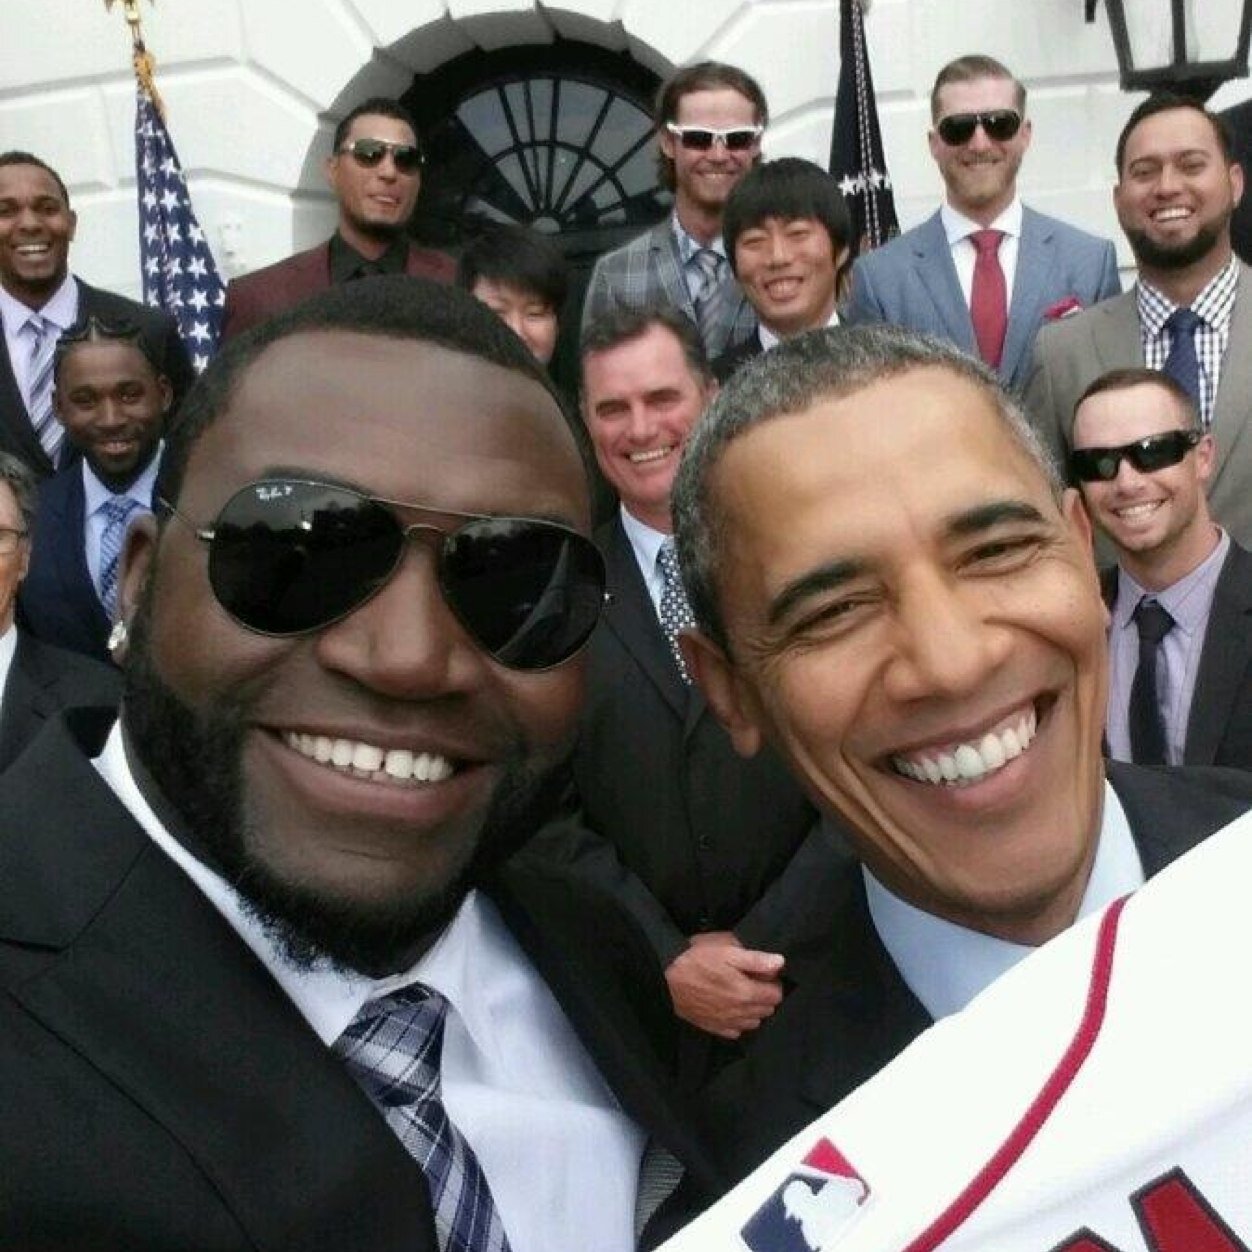 THIS IS OUR F'N CITY AND NOBODY IS GOING TO DICTATE OUR FREEDOM! Parody account not real @davidortiz